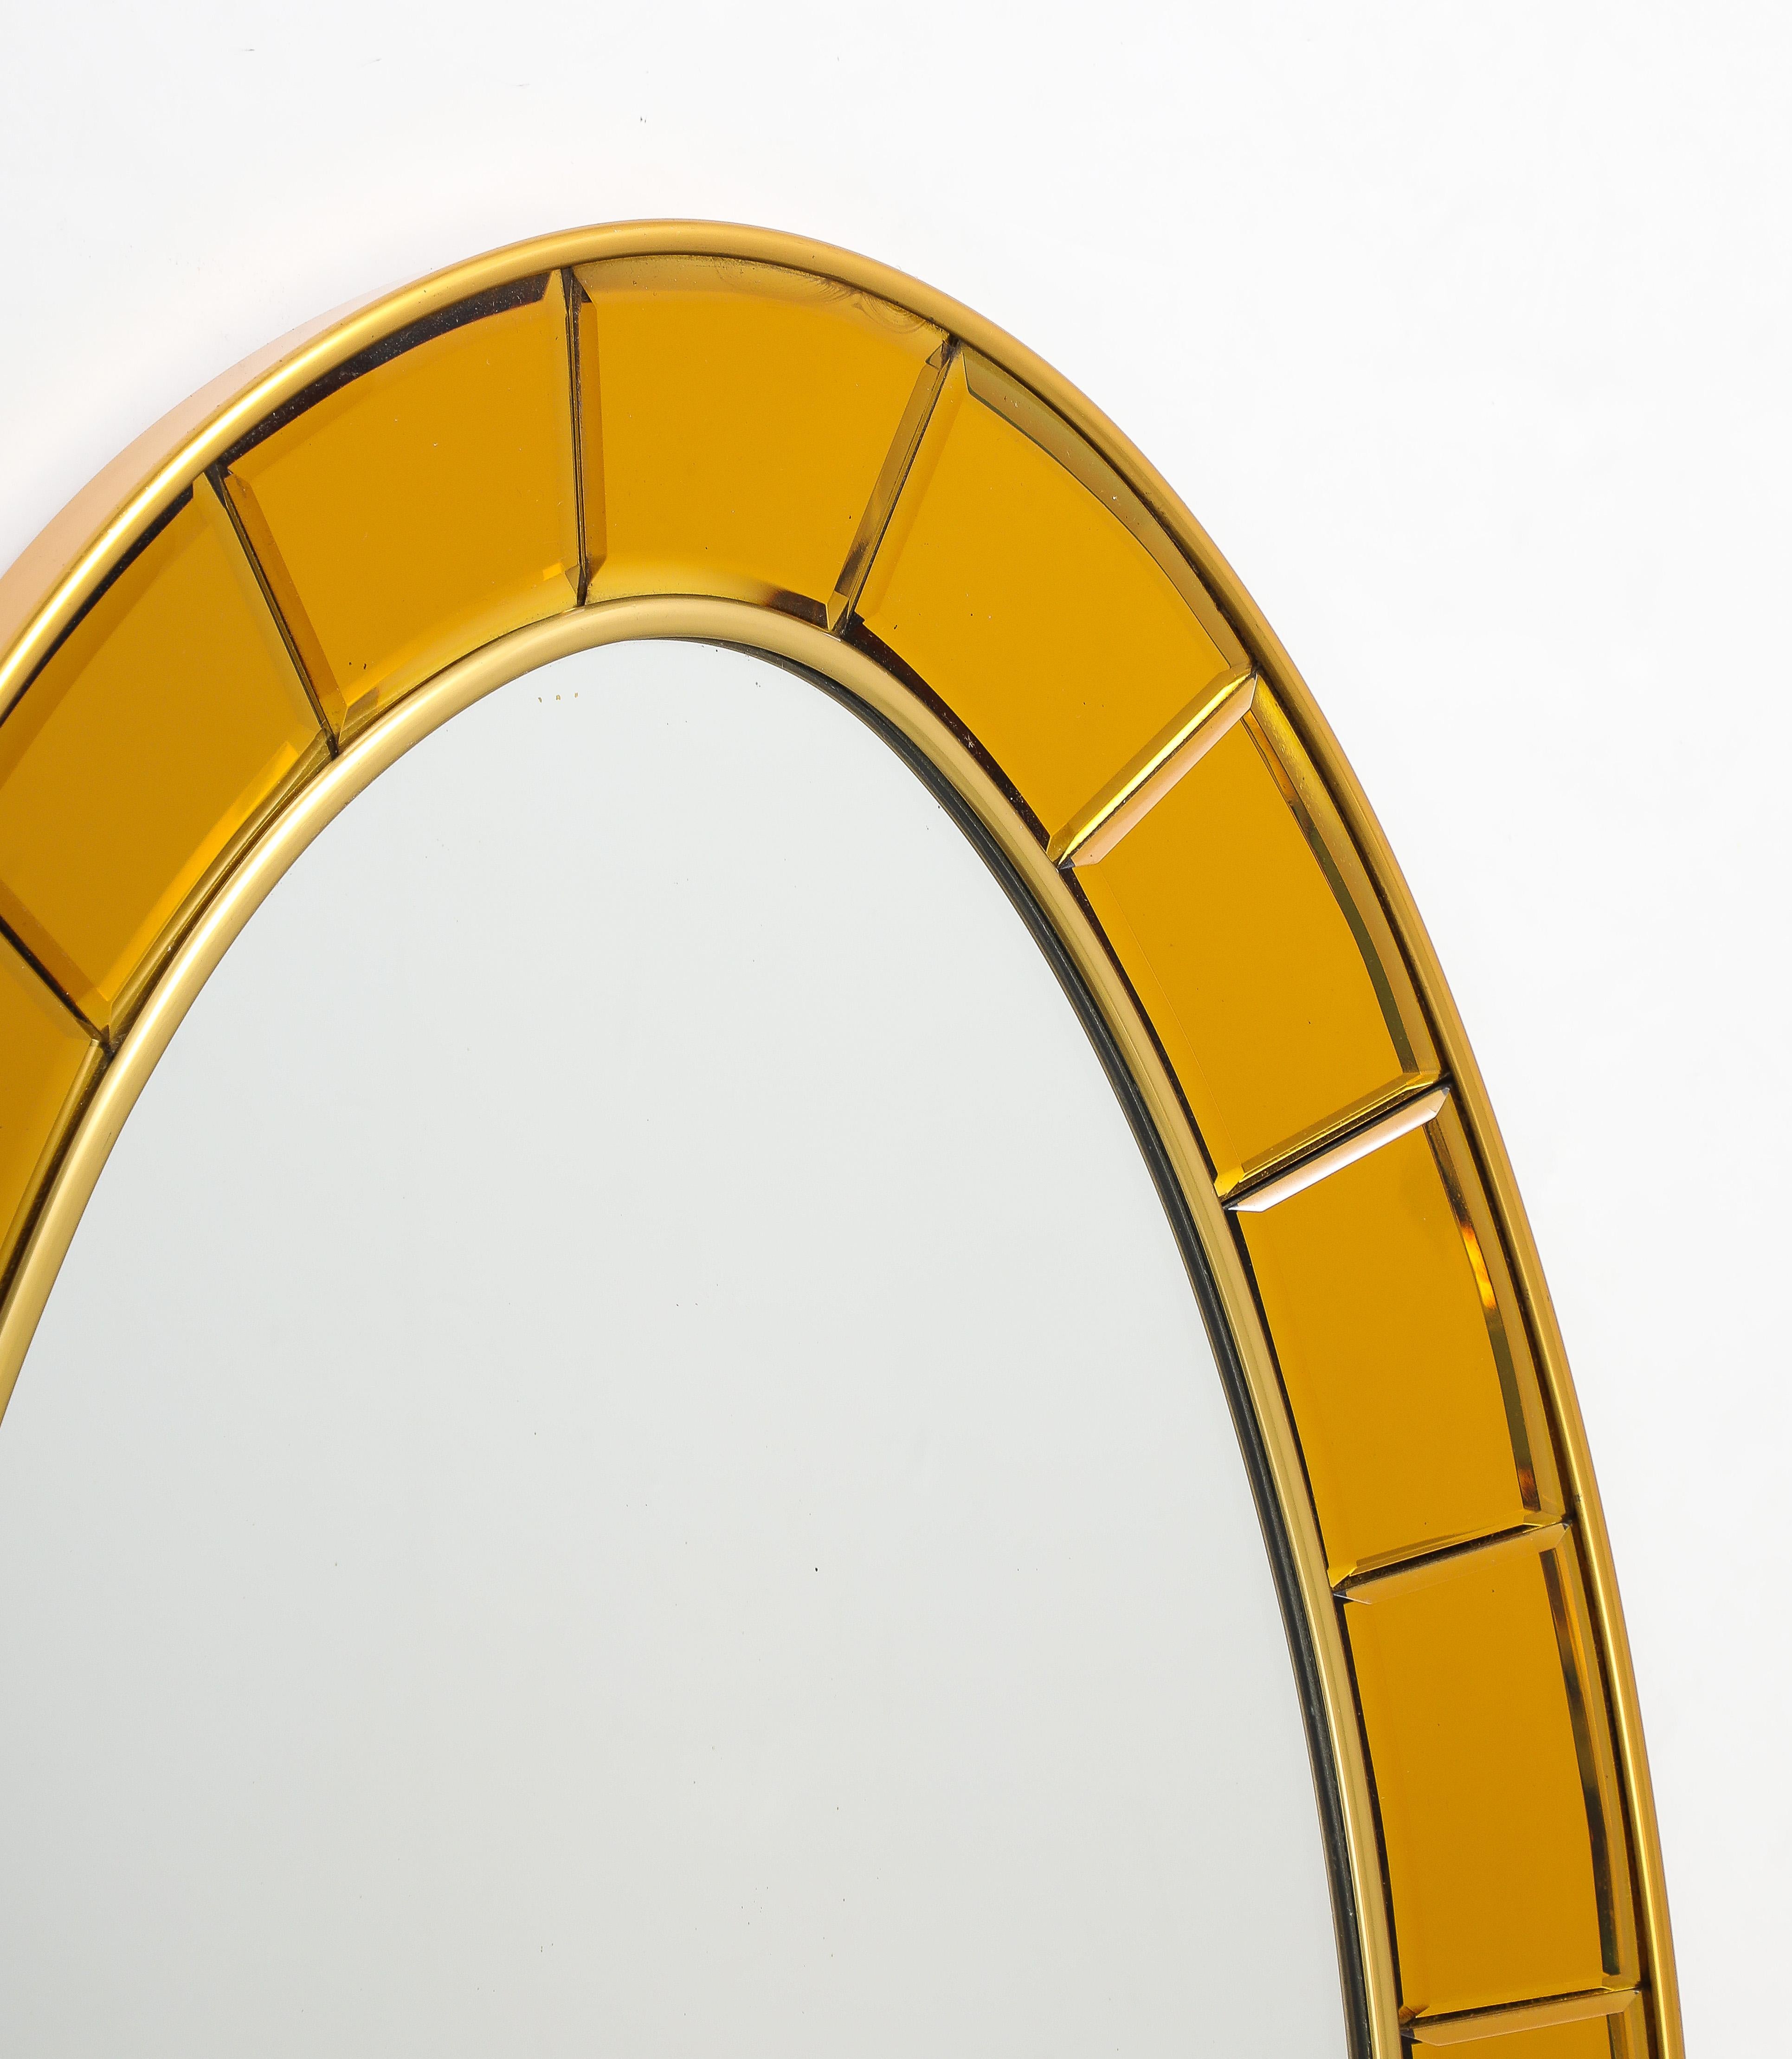 Cristal Art Oval Gold Hand-Cut Beveled Glass Mirror Model 2727, 1950s For Sale 4